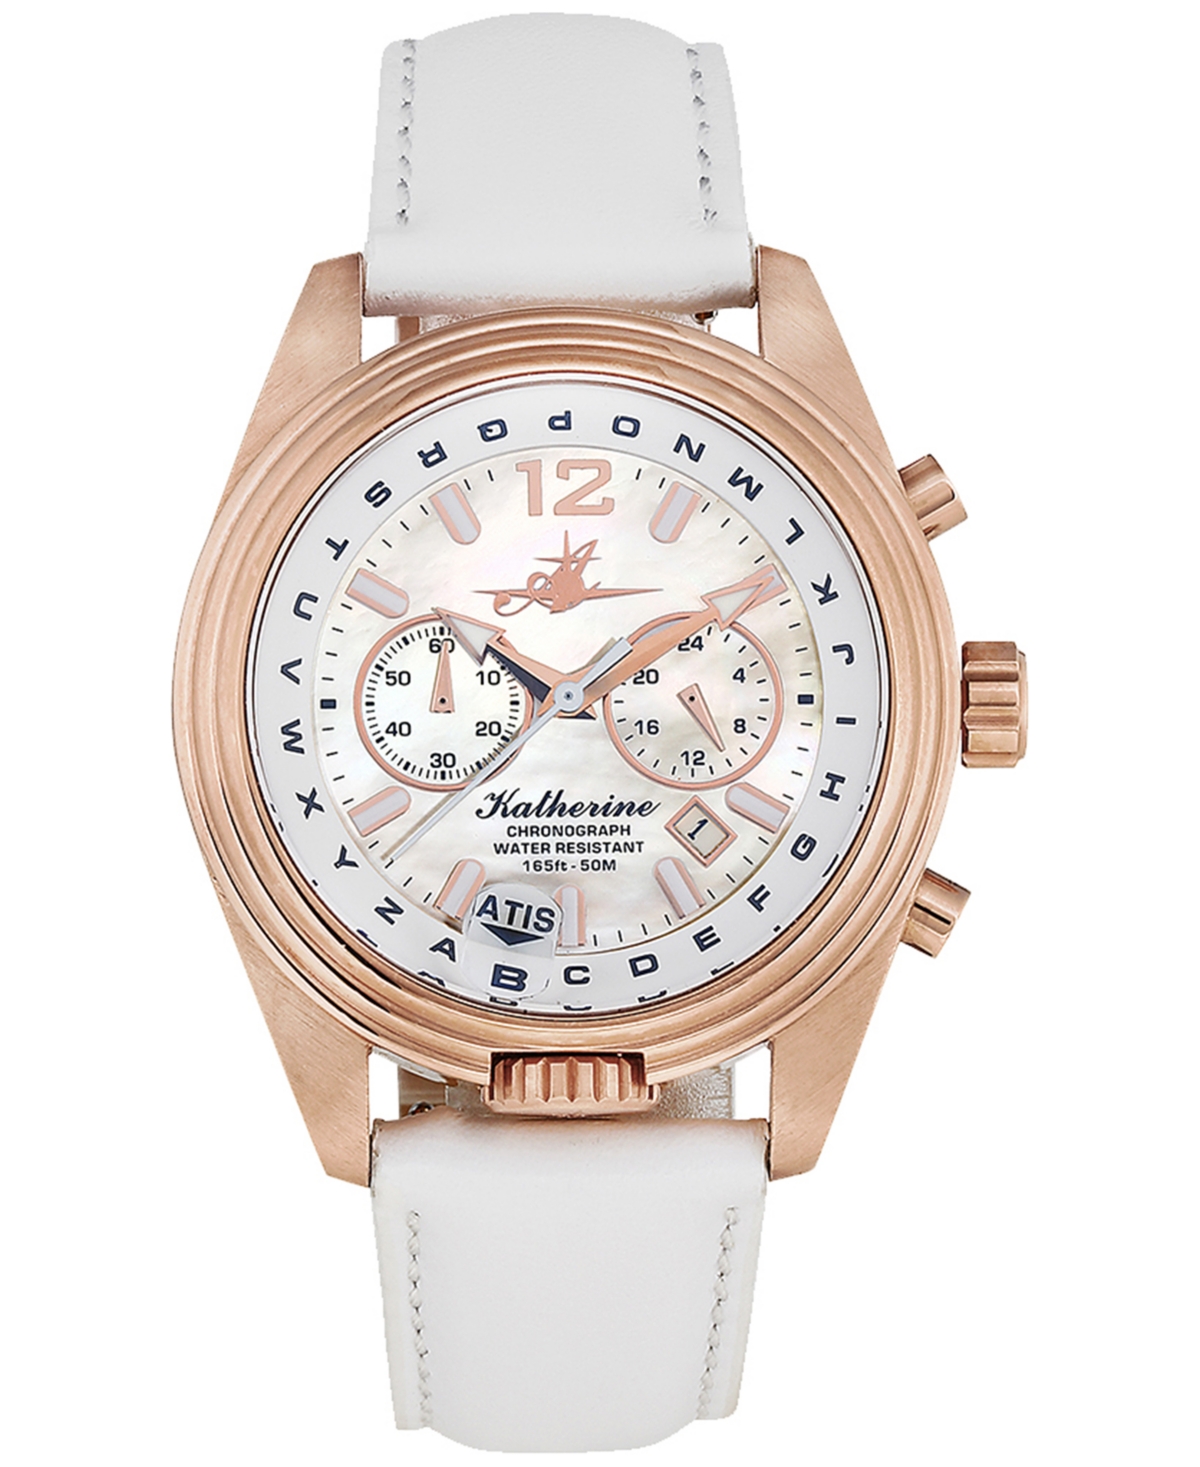 Katherine Women's Chronograph White Leather Strap Watch 40mm - Pearl White